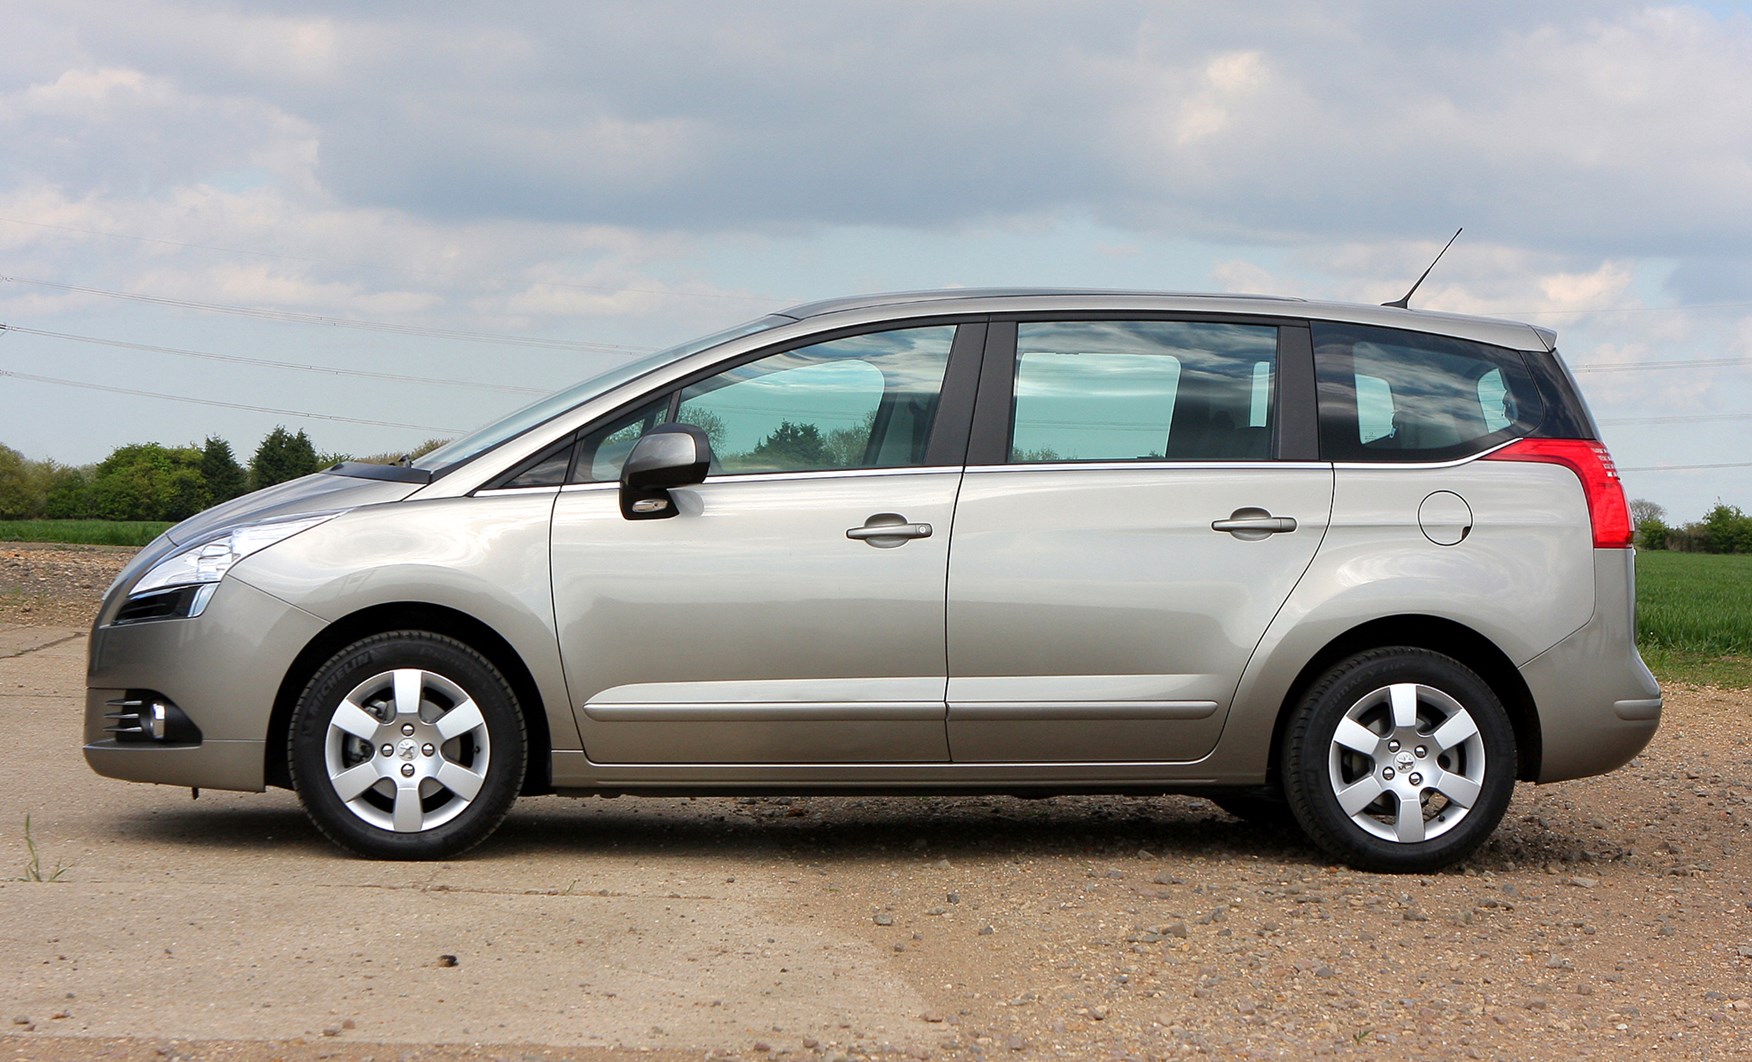 Used Peugeot 5008 Estate (2010  2016) Review  Parkers